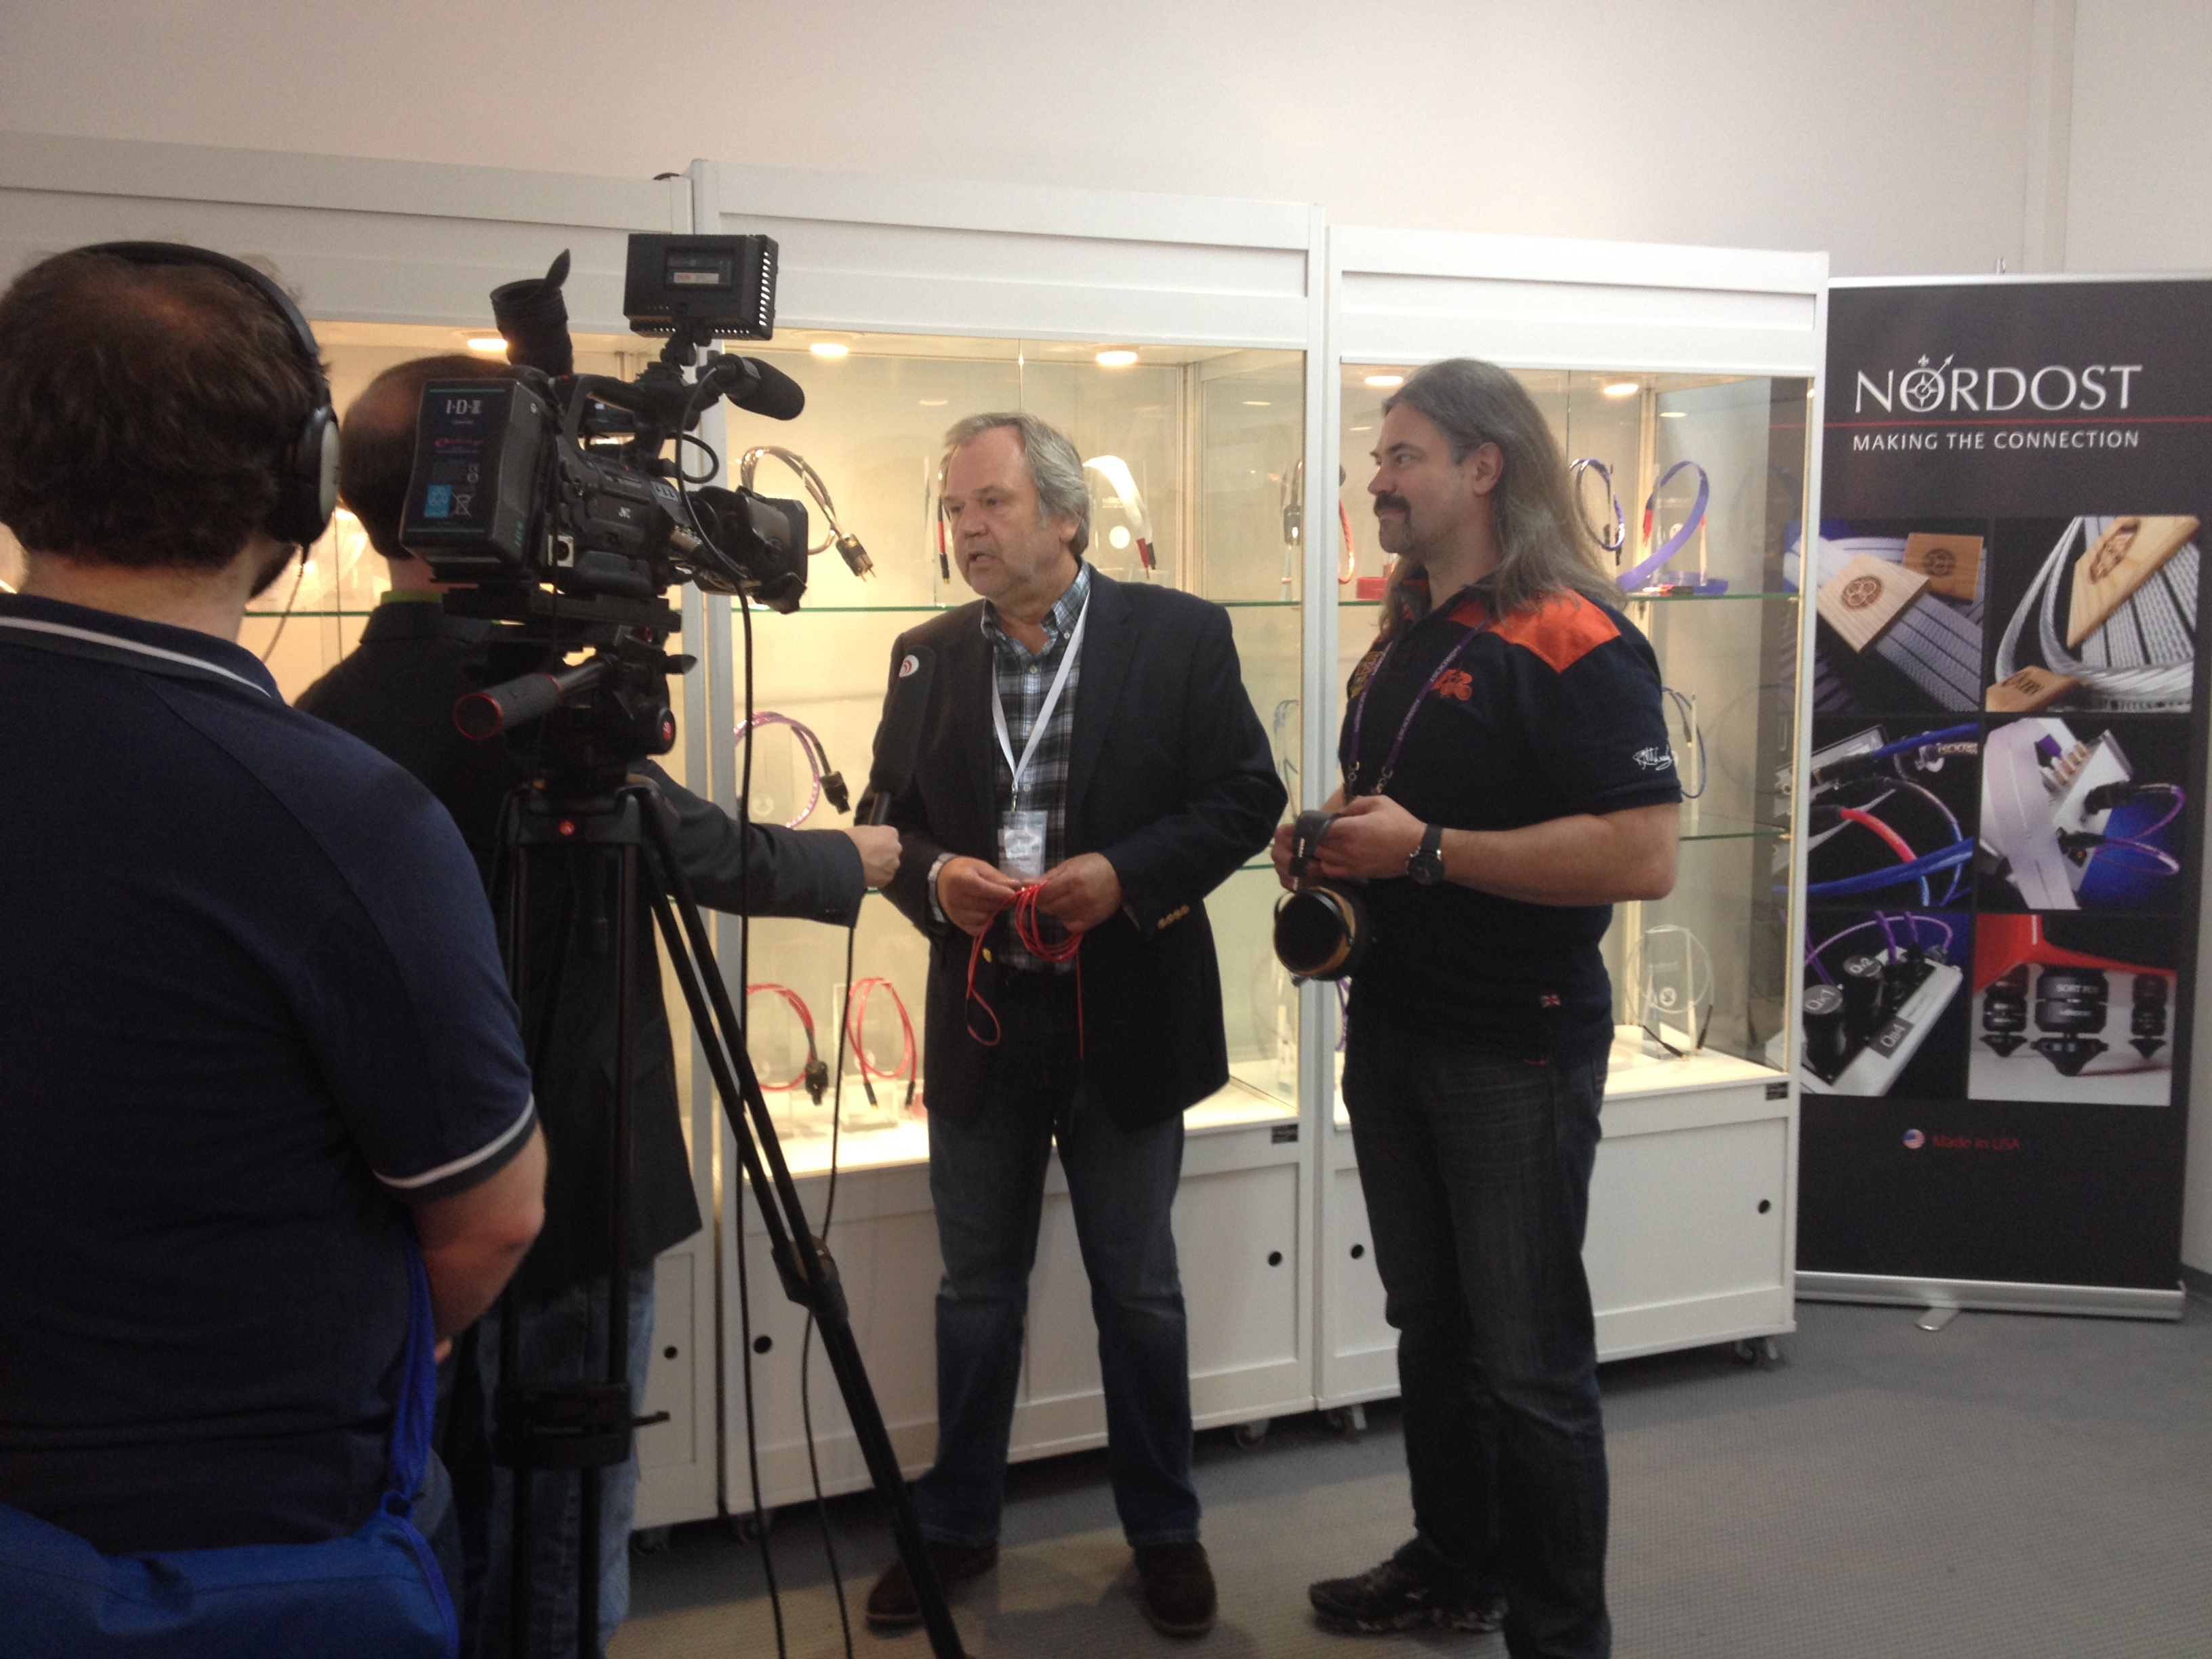 Bjorn Bengtsson and Andreas Proske showing off the new Heimdall 2 Headphone Cable